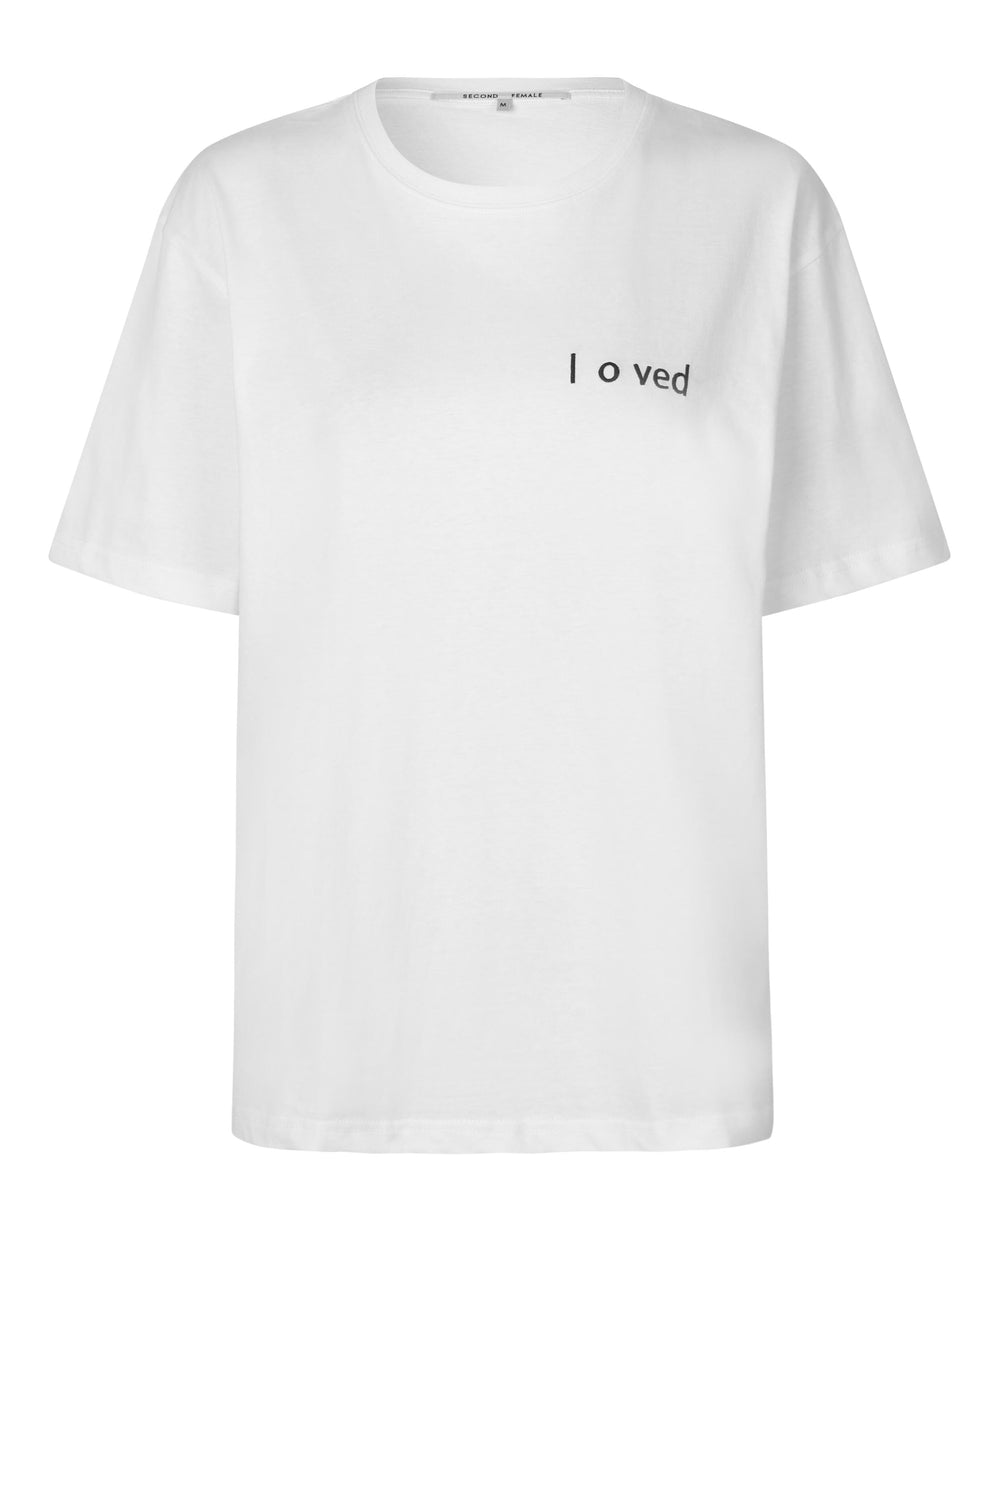 Second Female - Loved Tee - 1001 White T-shirts 